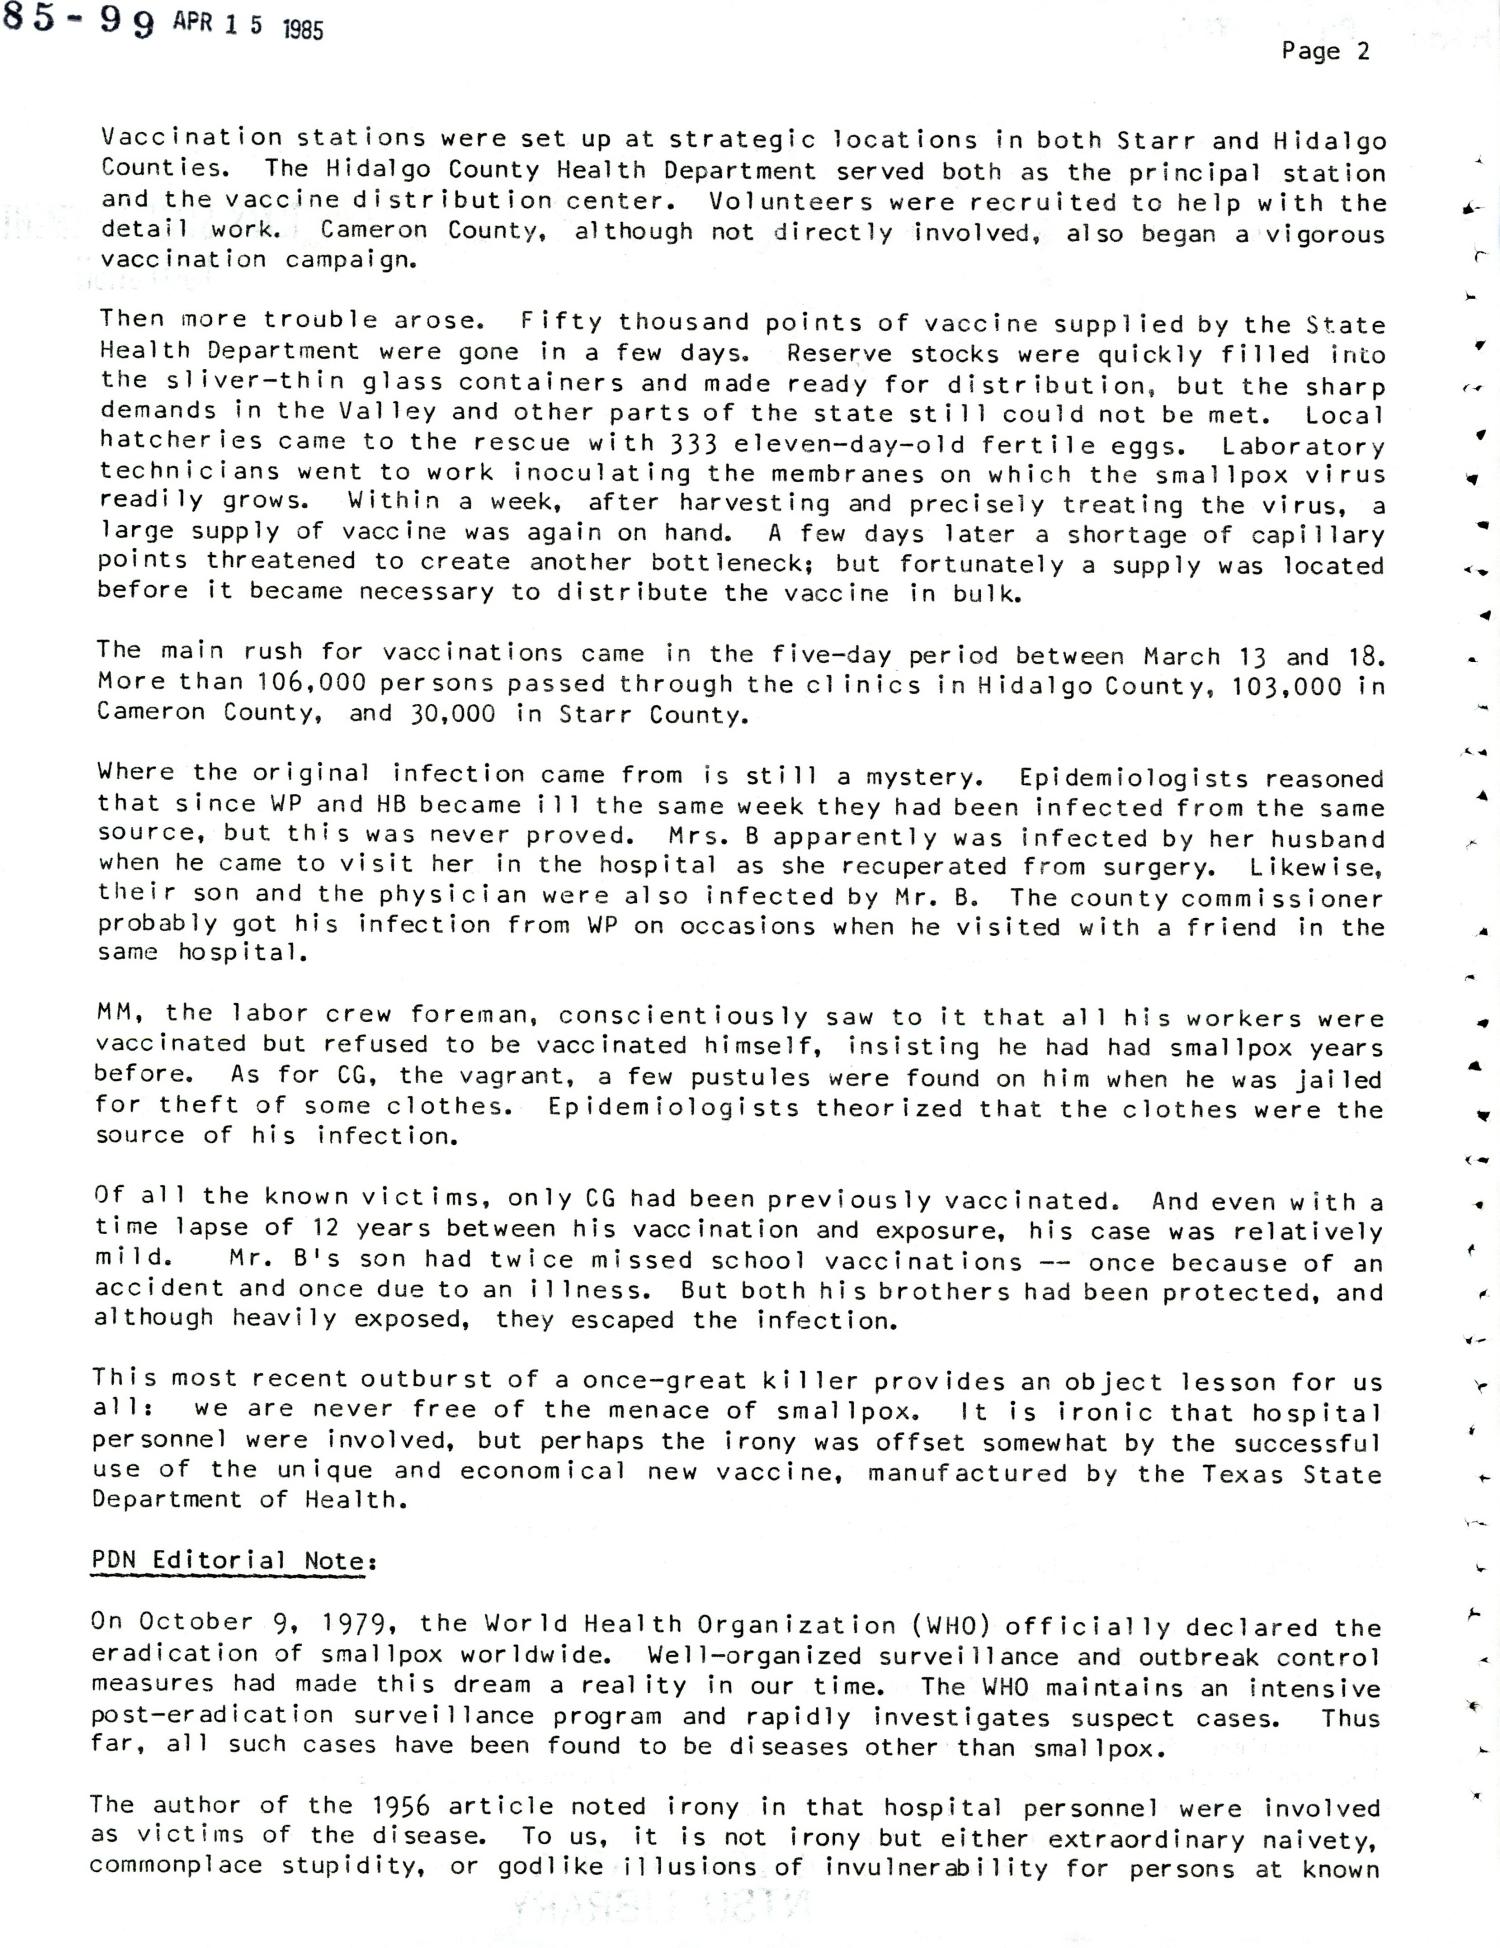 Texas Preventable Disease News, Volume 45, Number 11, March 16, 1985
                                                
                                                    PAGE2
                                                